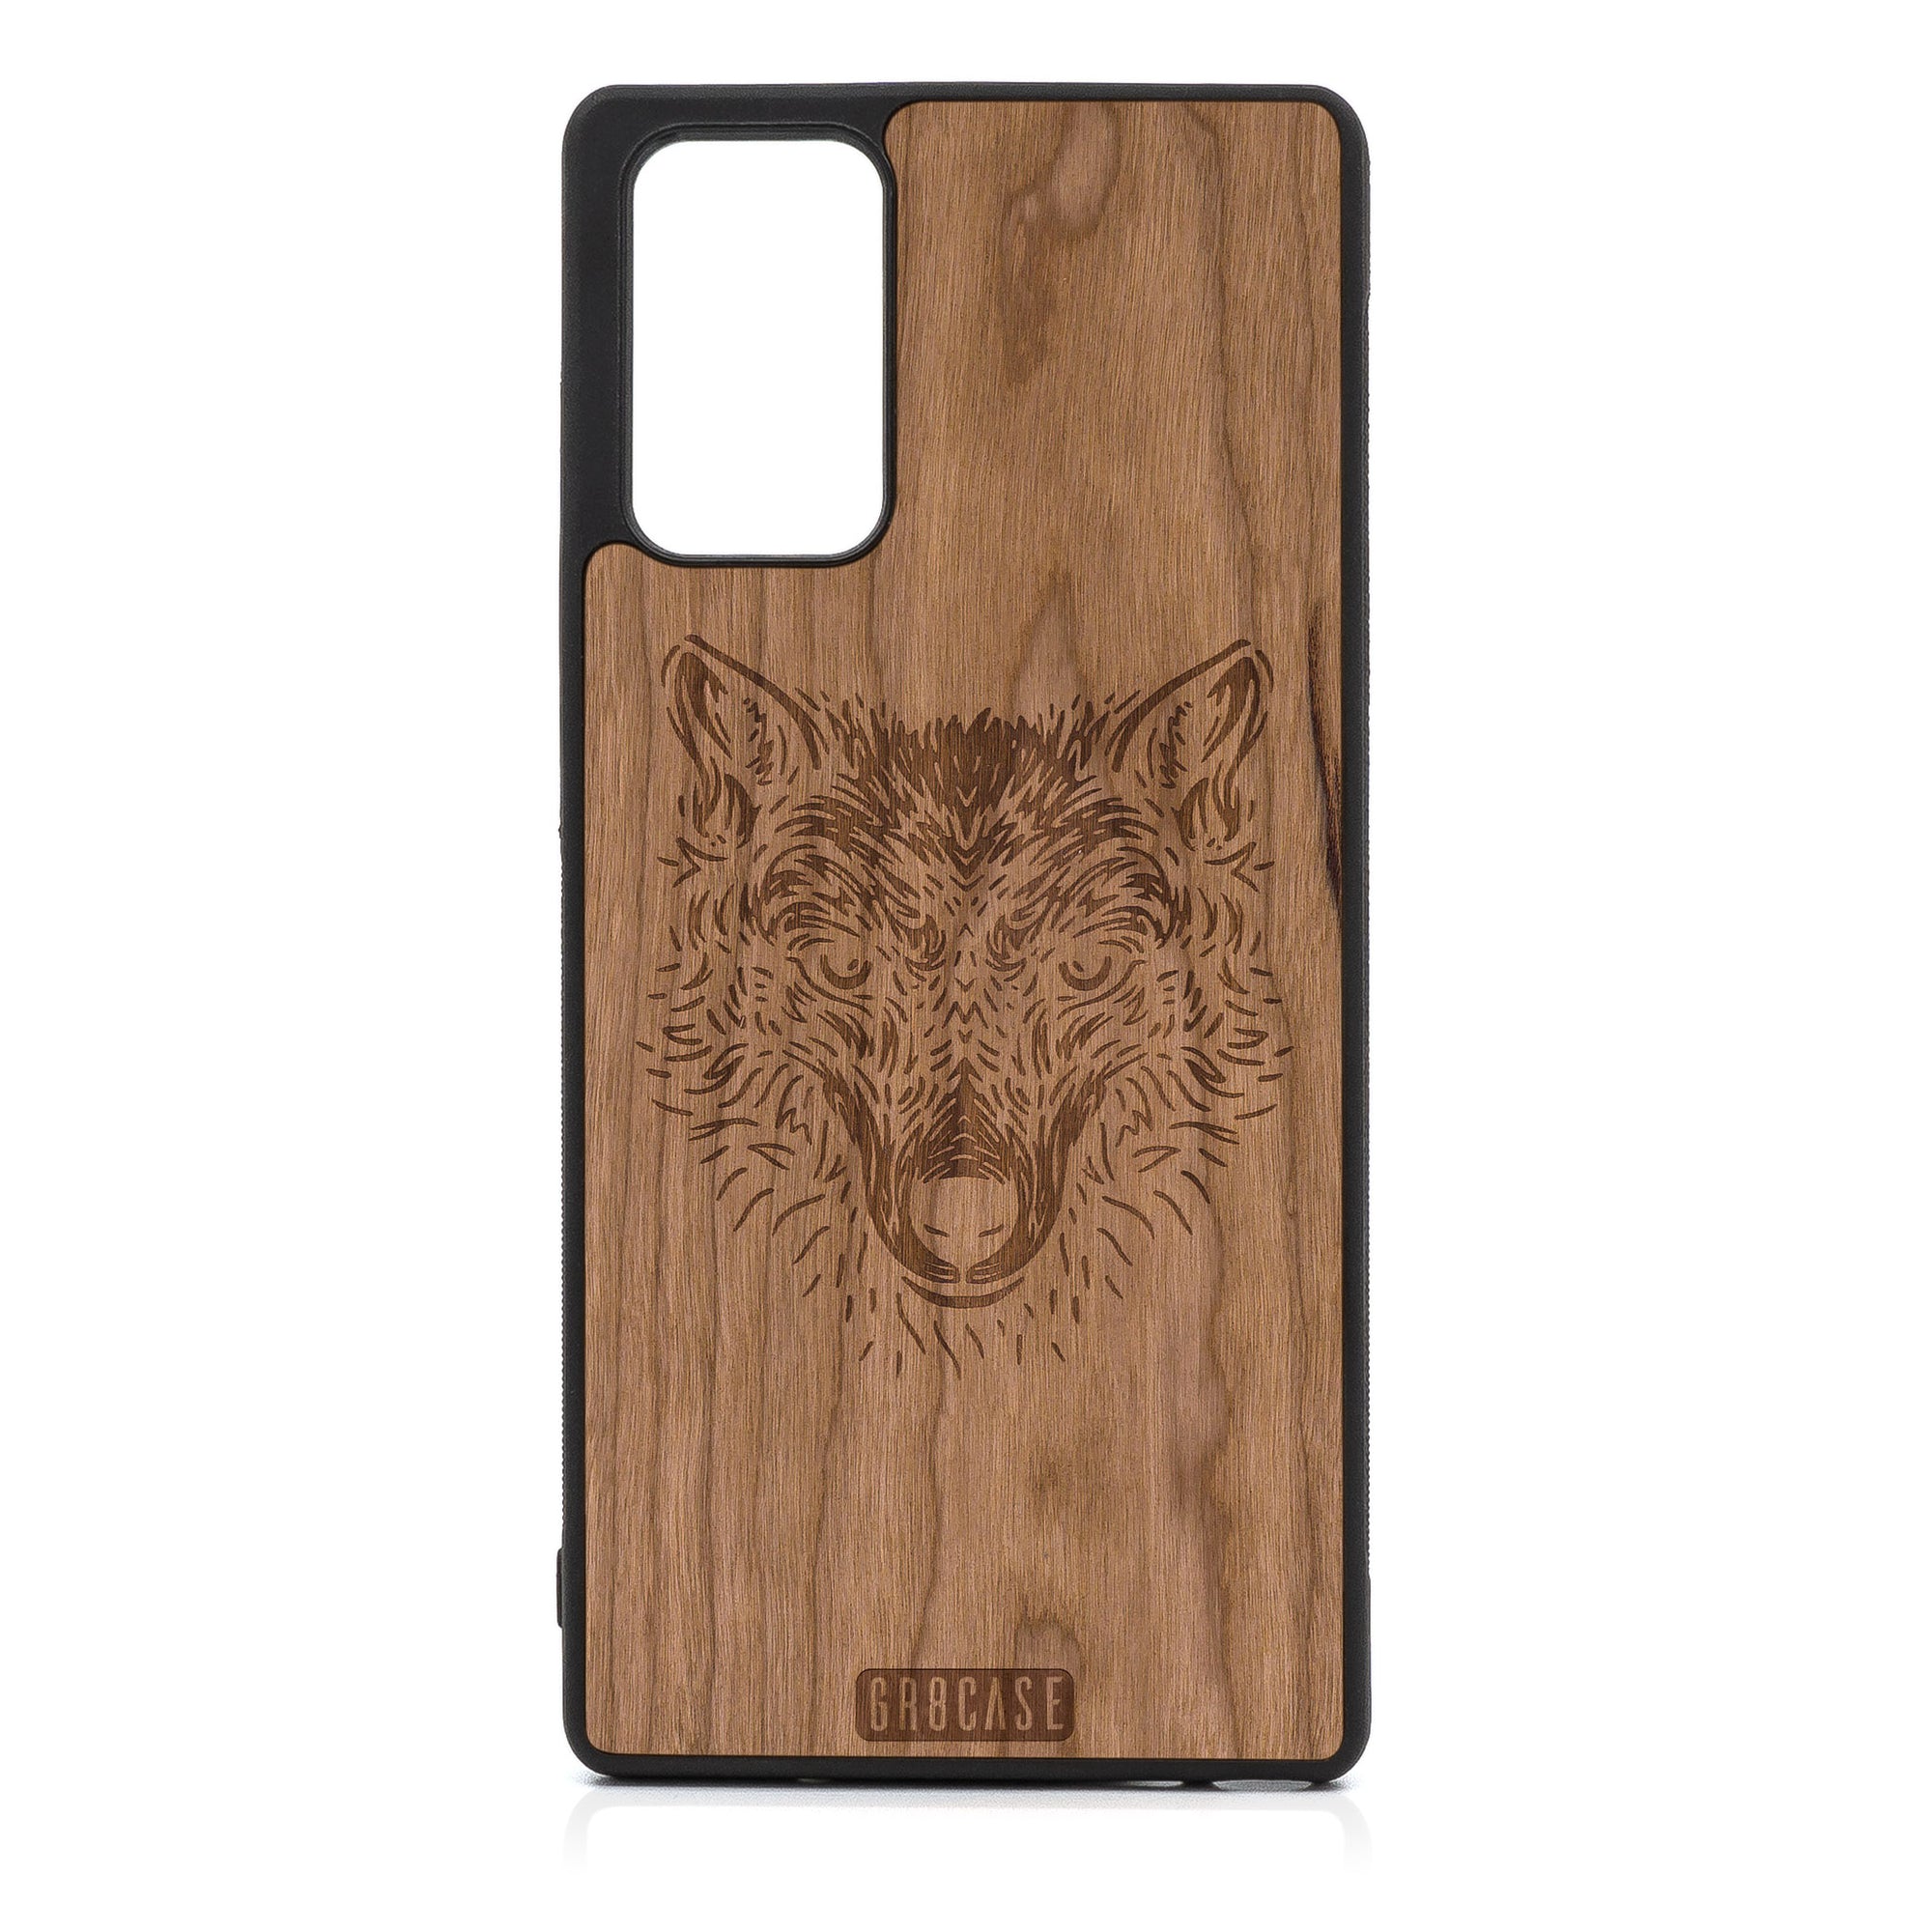 Furry Wolf Design Wood Case For Samsung Galaxy Note 20